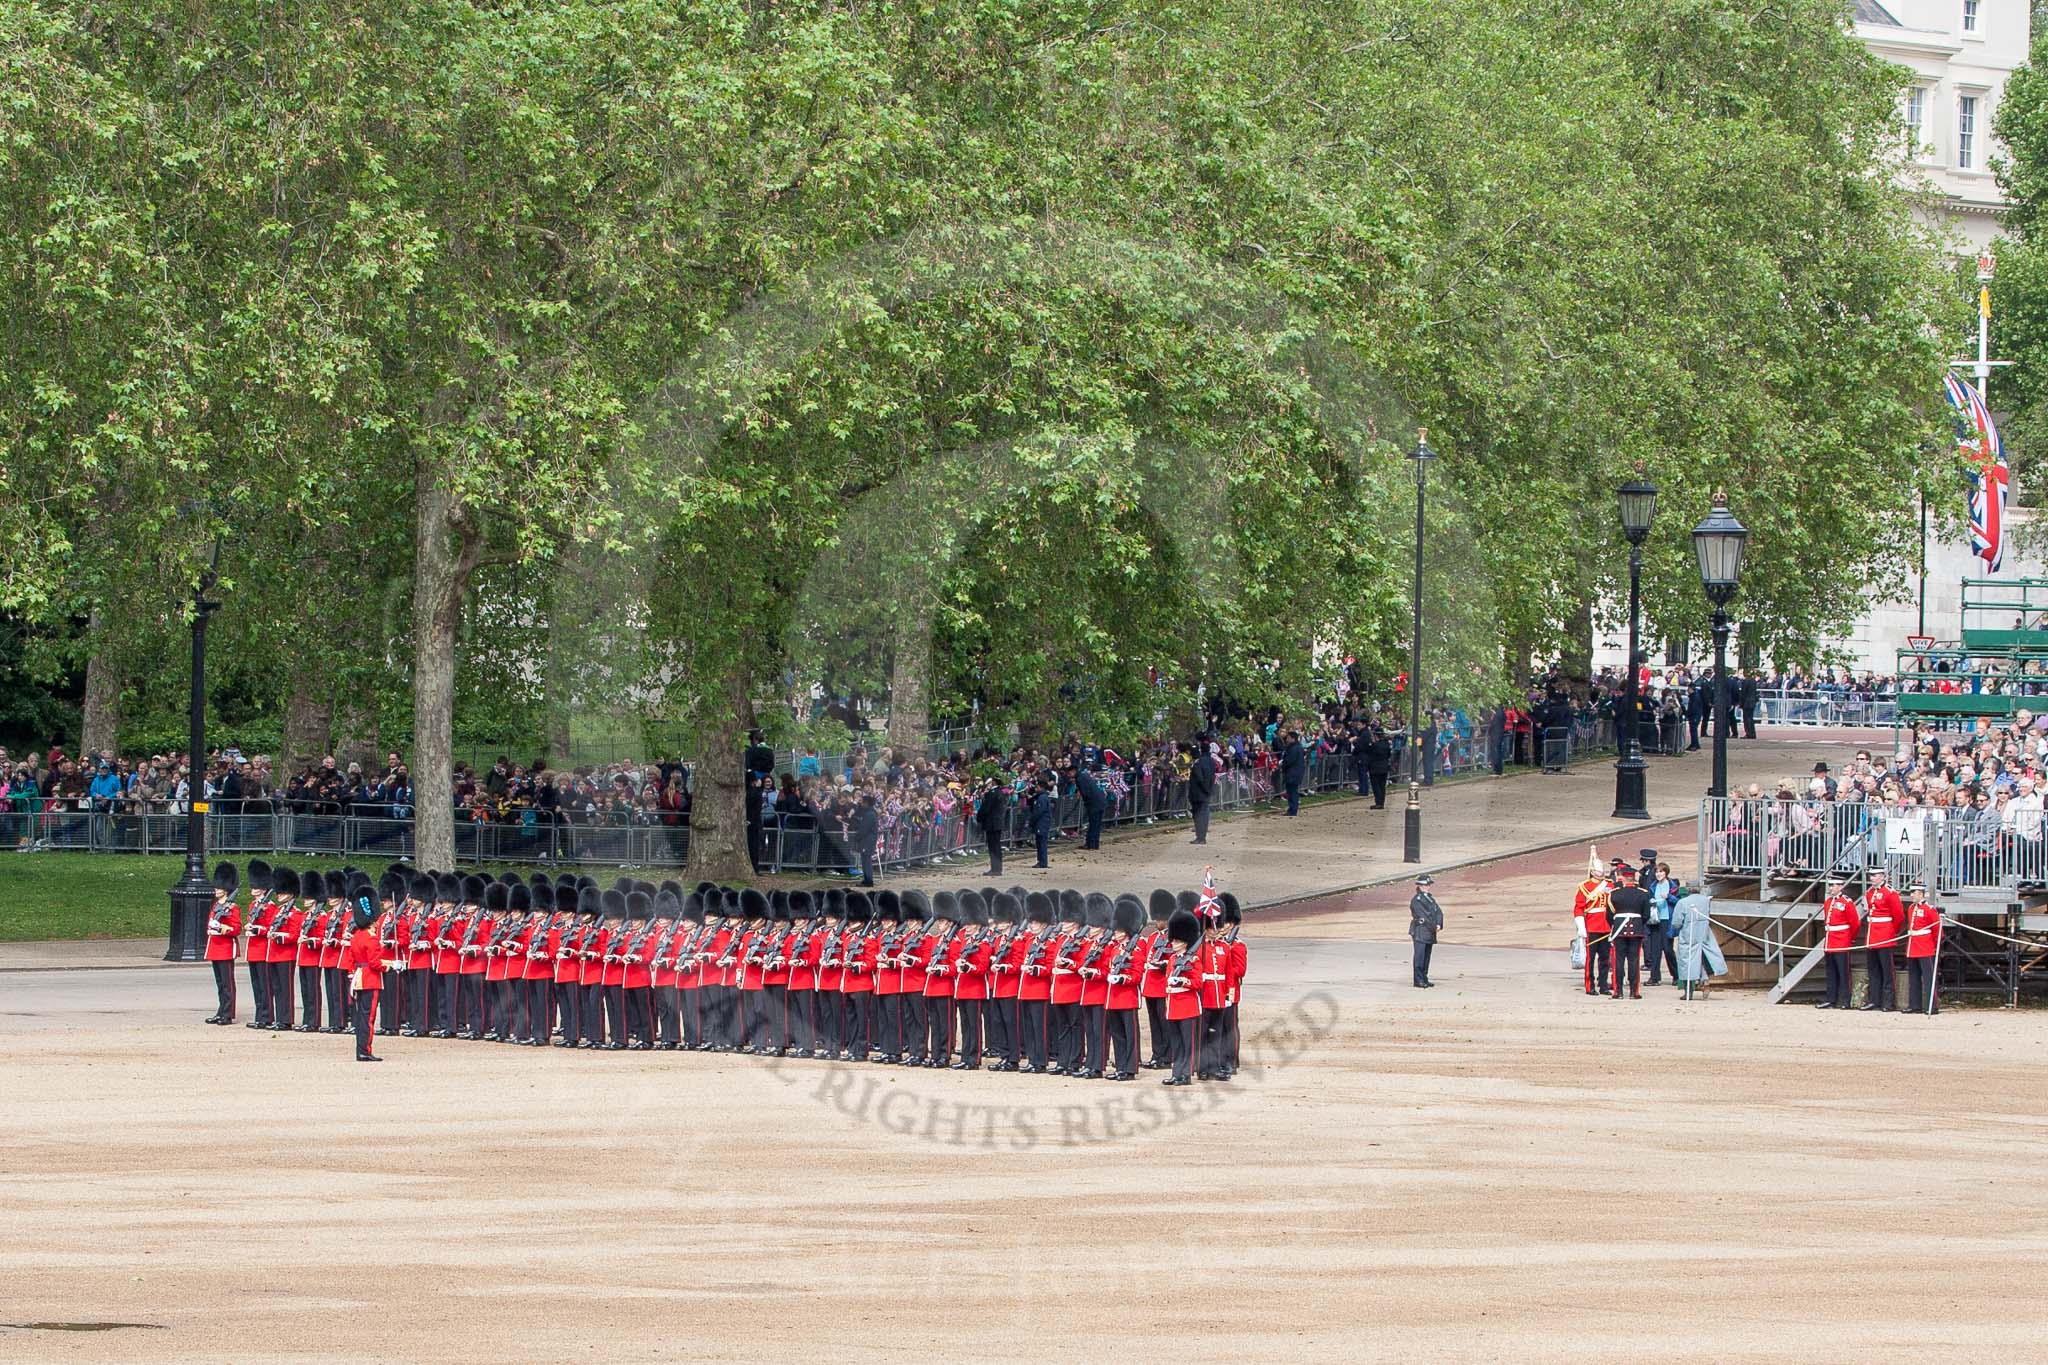 The Colonel's Review 2012: No. 5 Guard (1st Battalion Irish Guards) taking their intial position at Horse Guards Parade..
Horse Guards Parade, Westminster,
London SW1,

United Kingdom,
on 09 June 2012 at 10:23, image #48